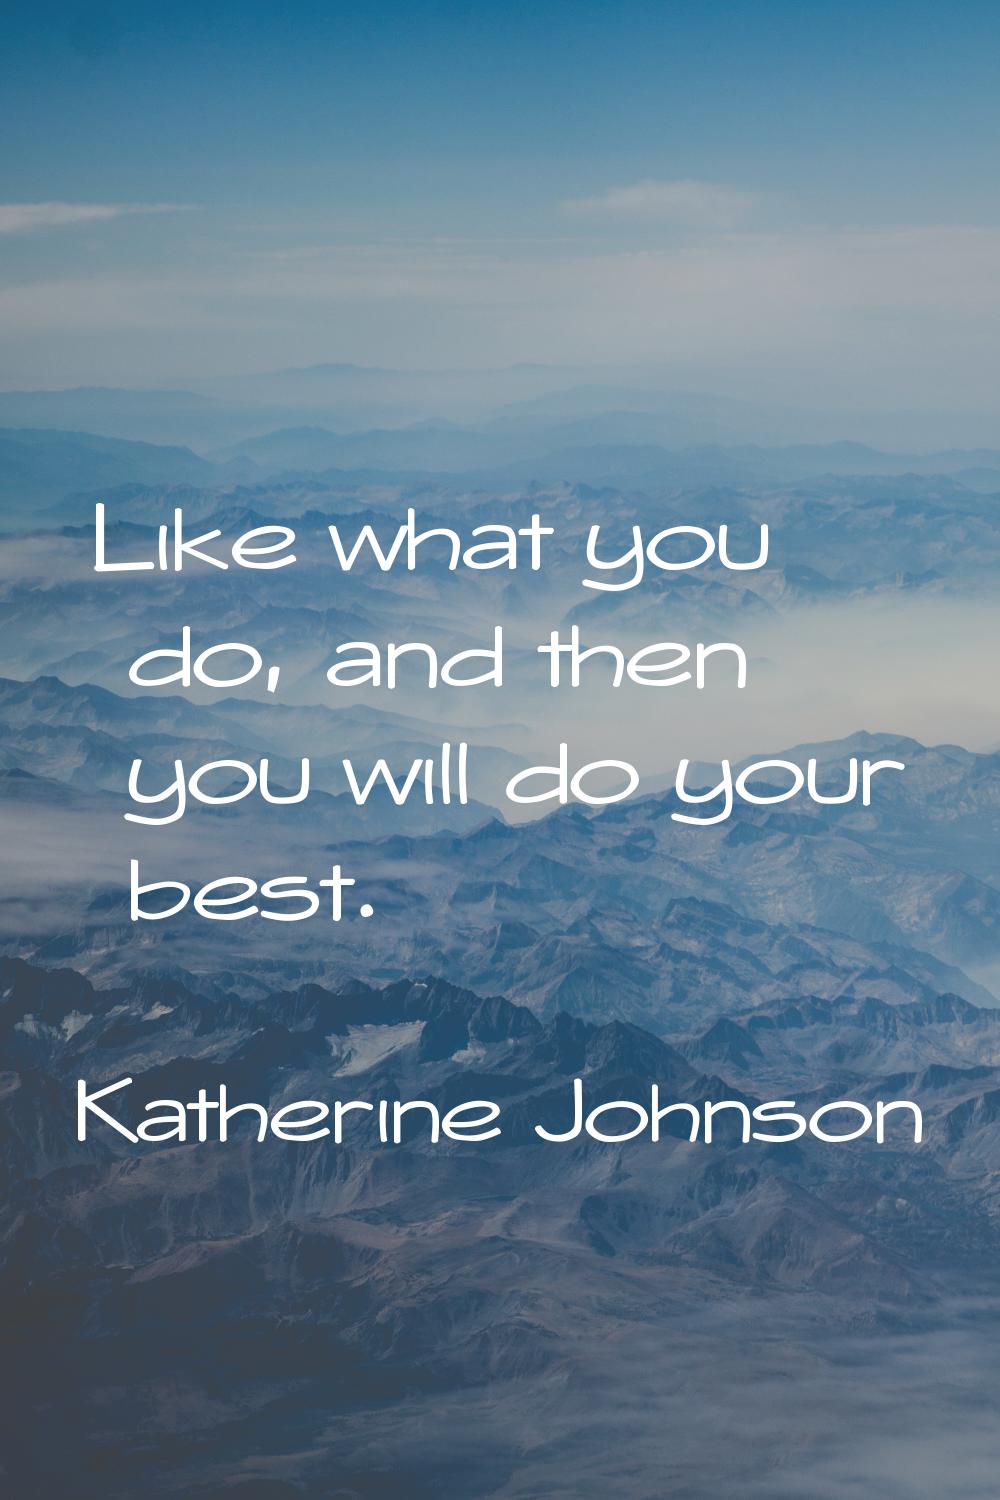 Like what you do, and then you will do your best.